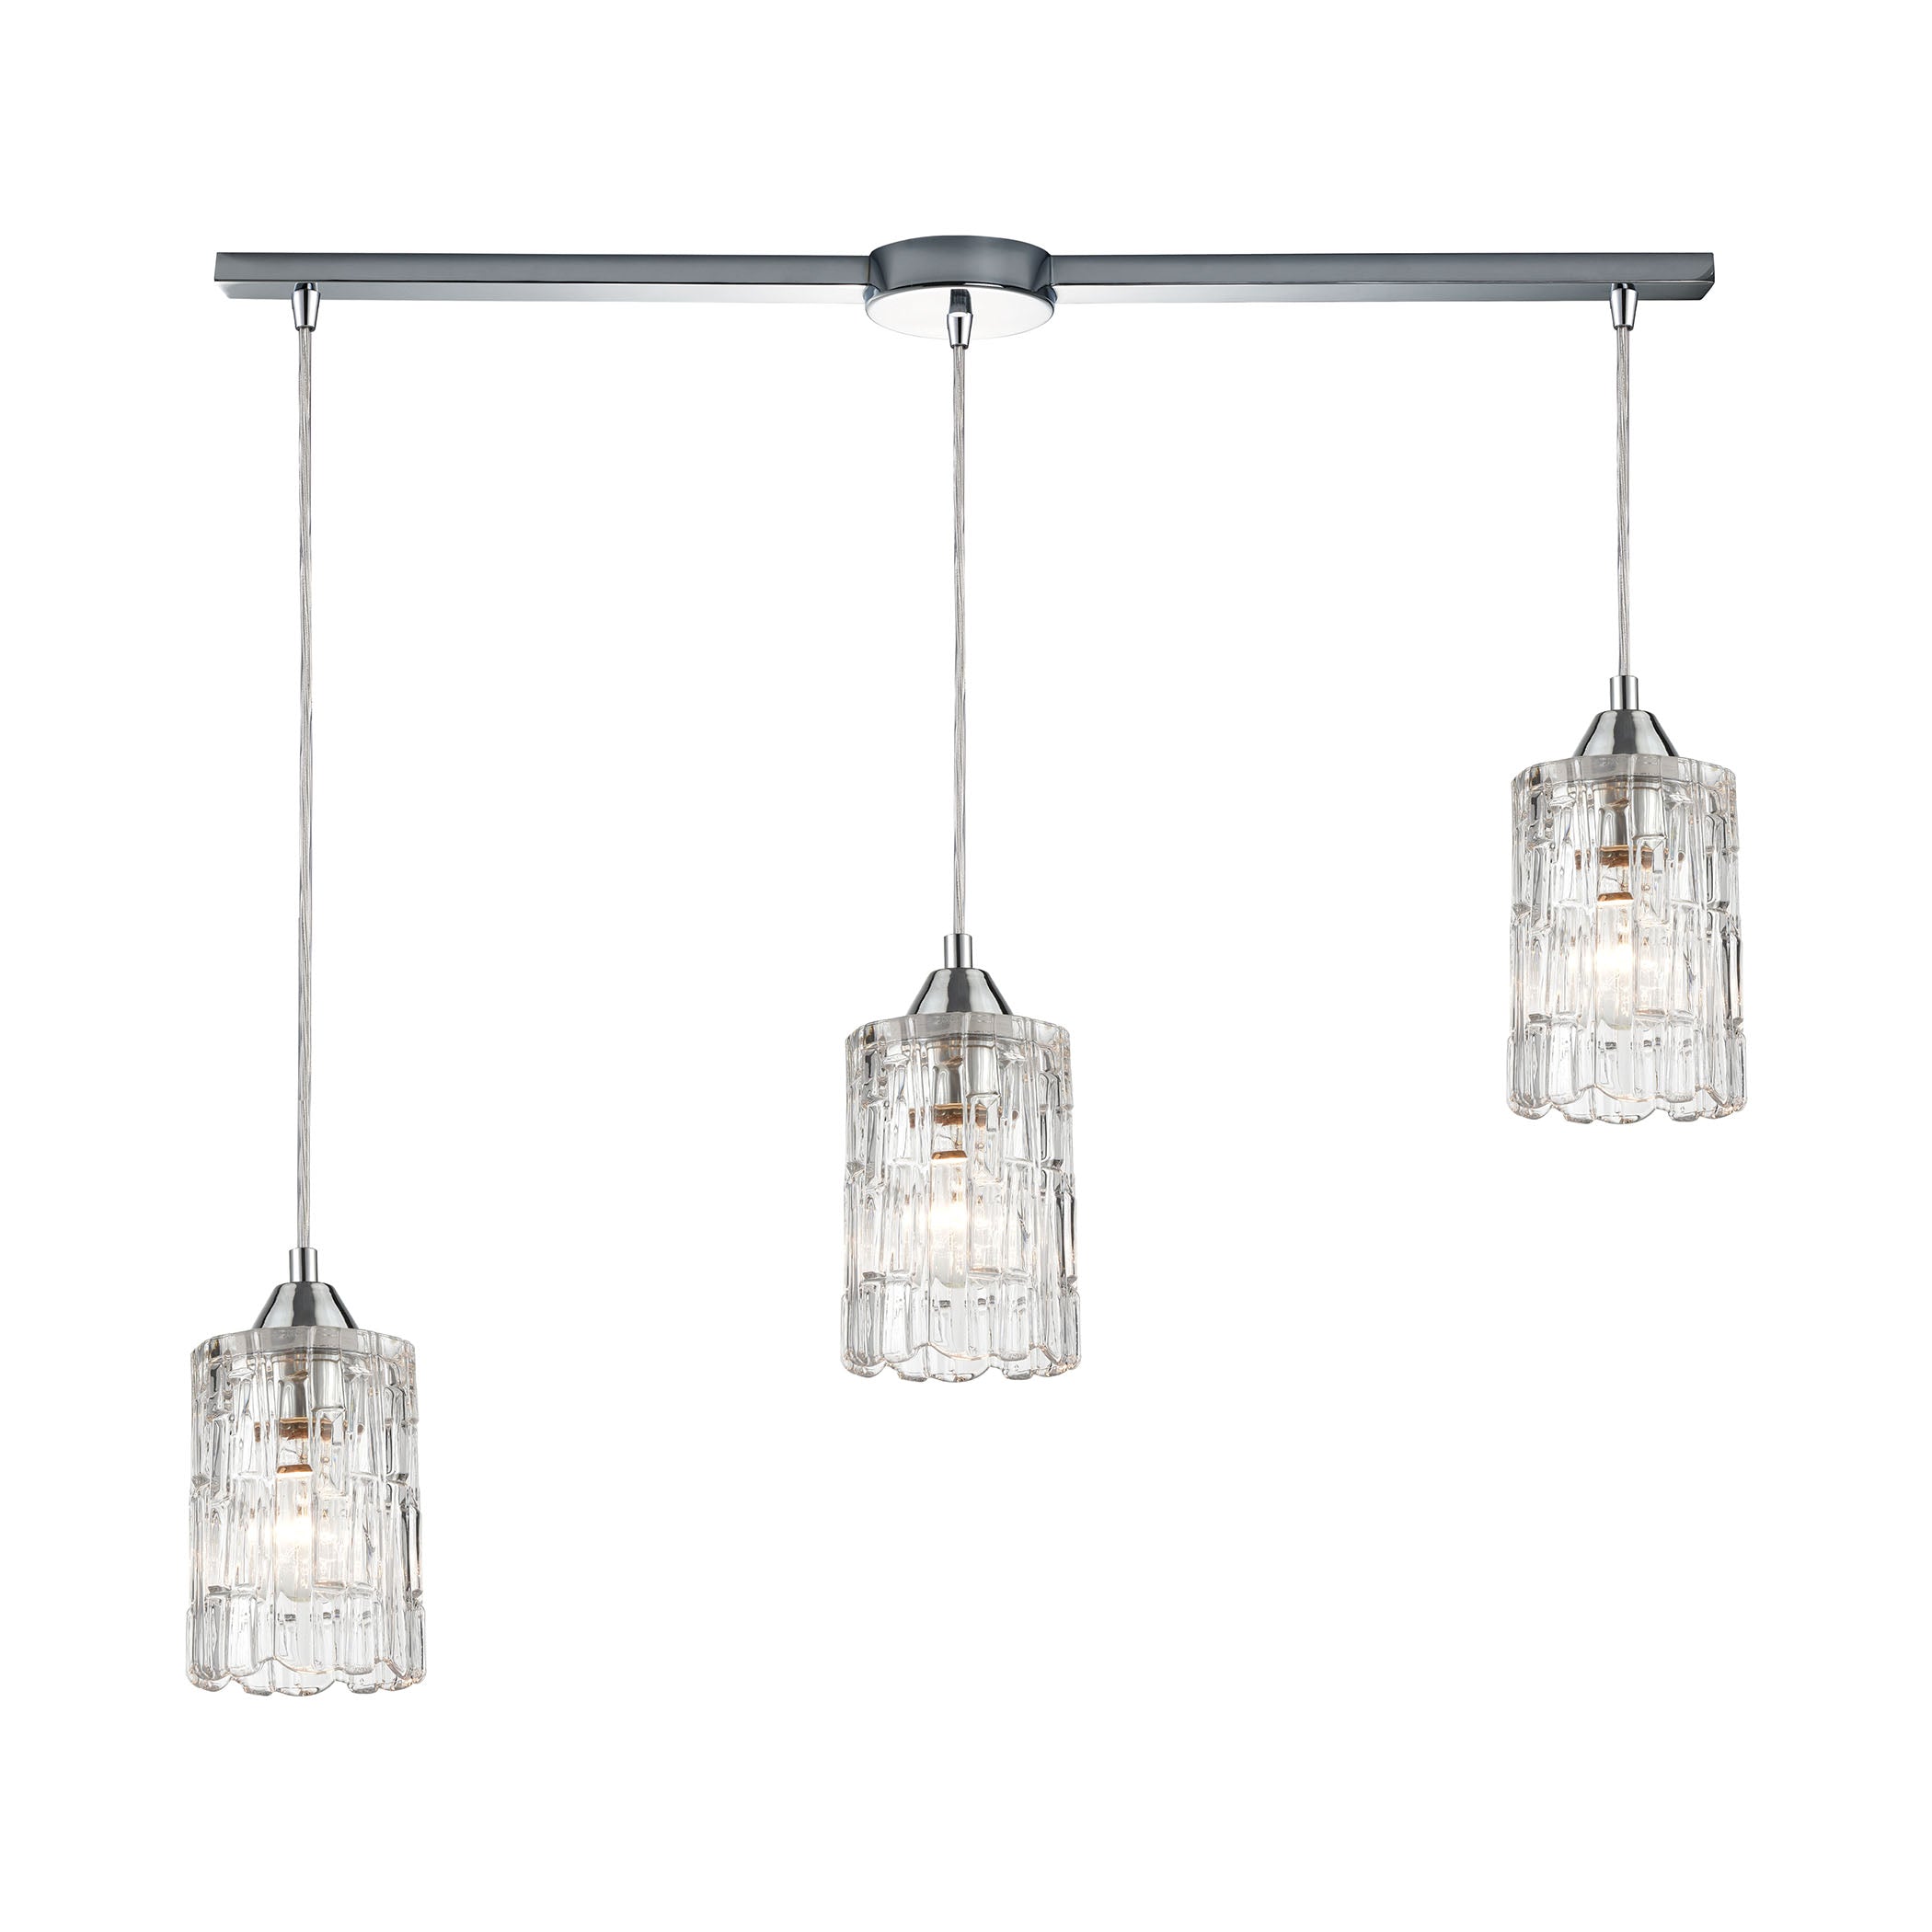 ELK Lighting 17414/3L Ezra 3-Light Linear Mini Pendant Fixture in Polished Chrome with Textured Clear Crystal